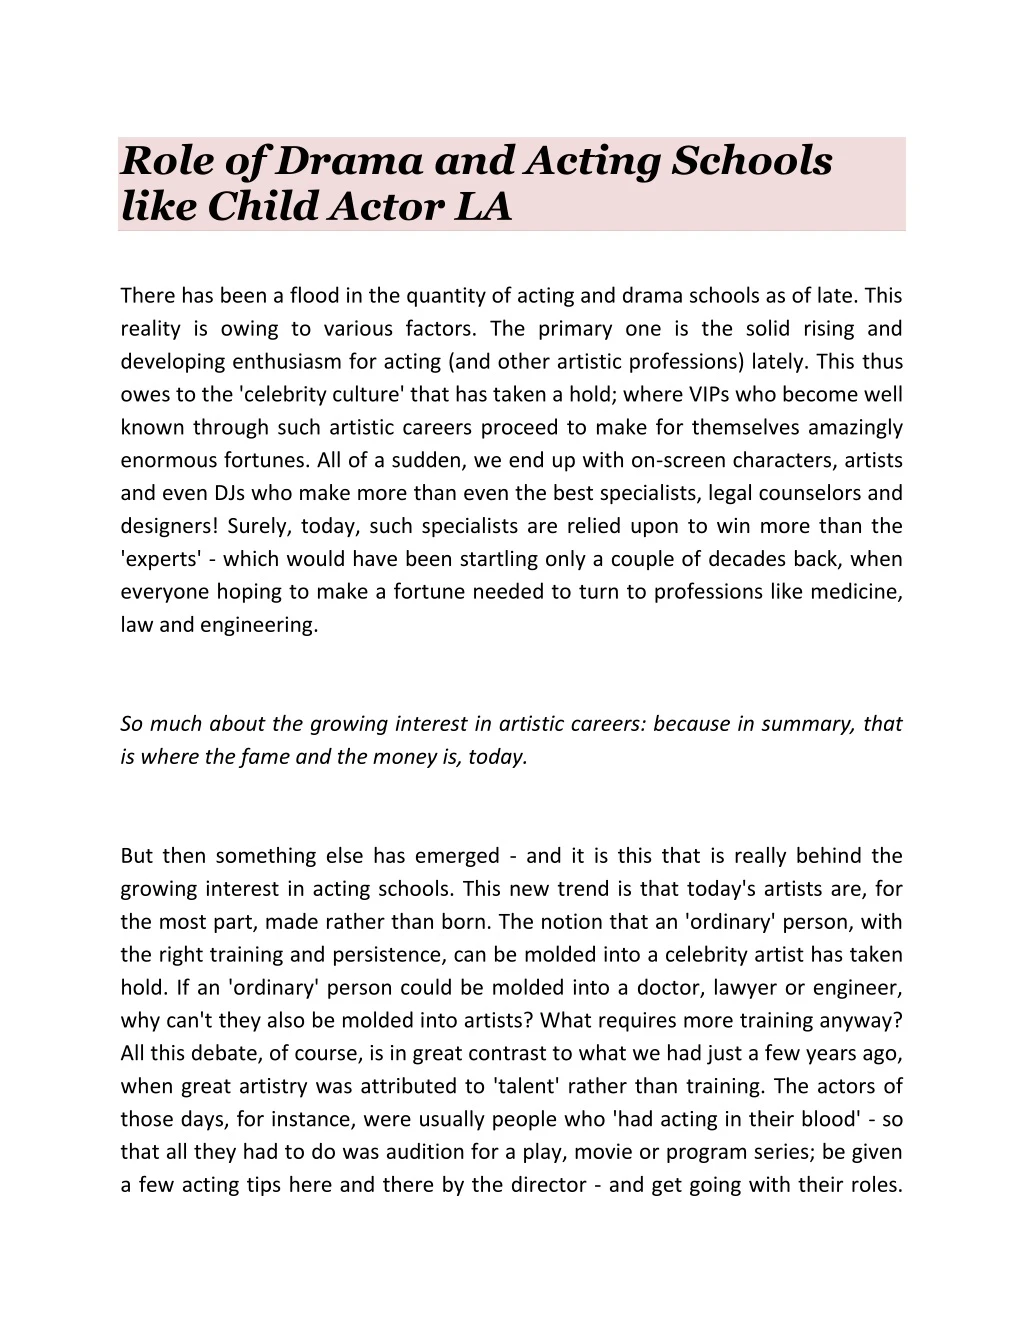 role of drama and acting schools like child actor